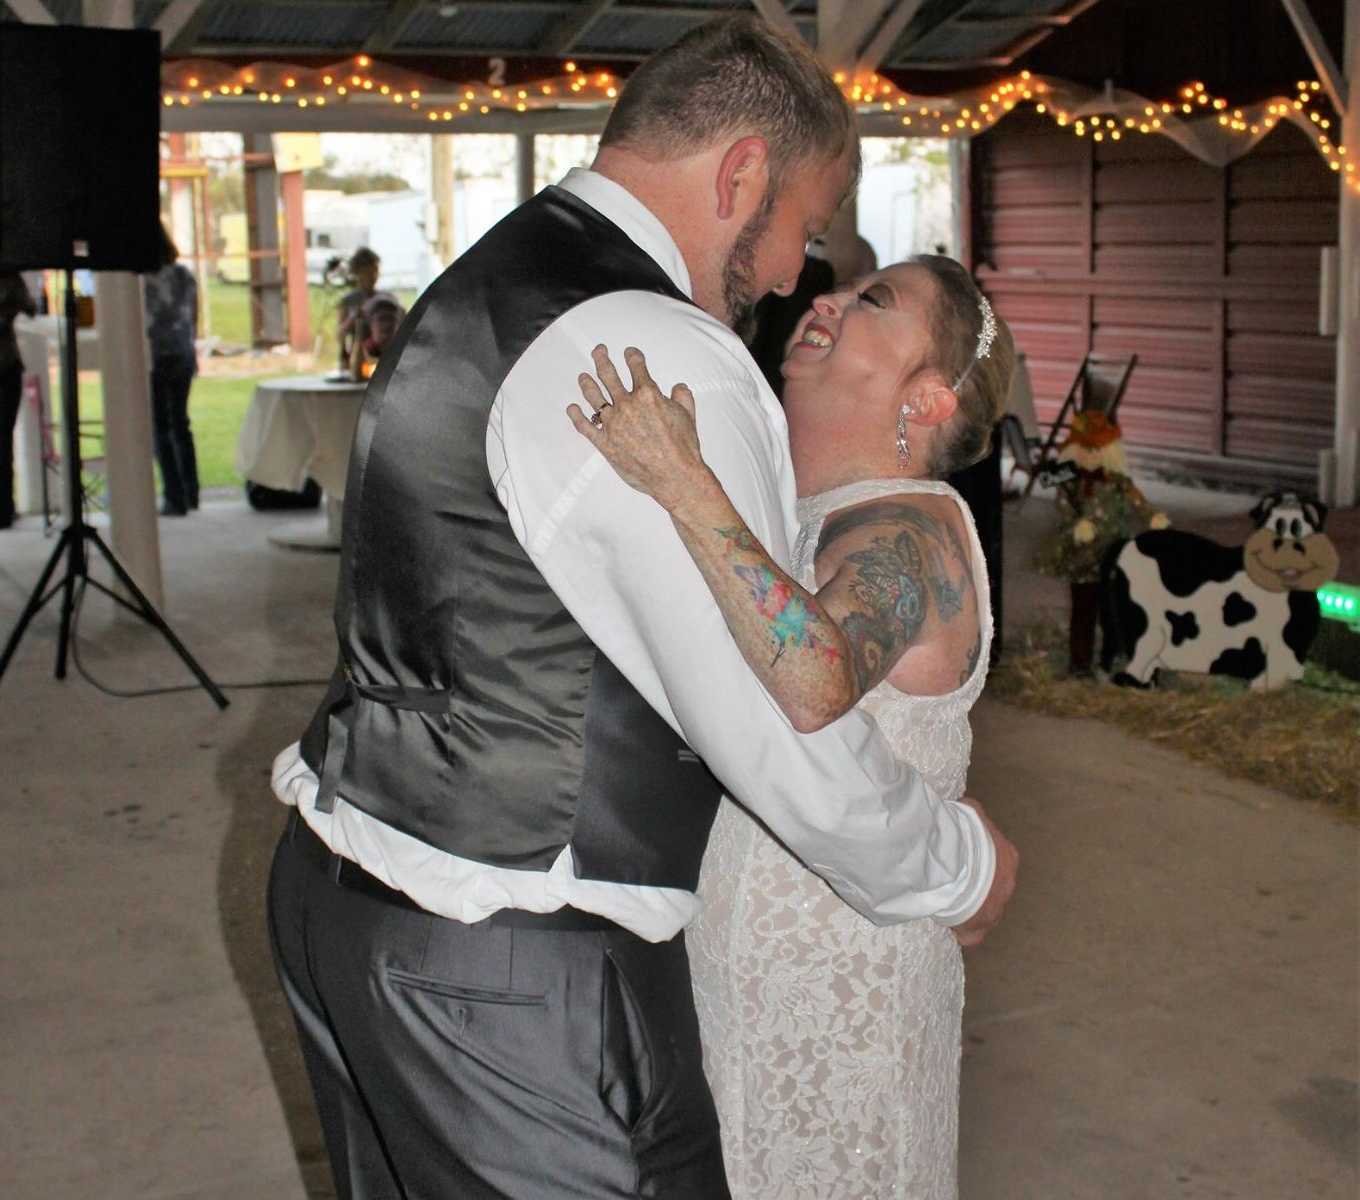 disabled couple holding each other close while smiling at each other at wedding with speakers in background